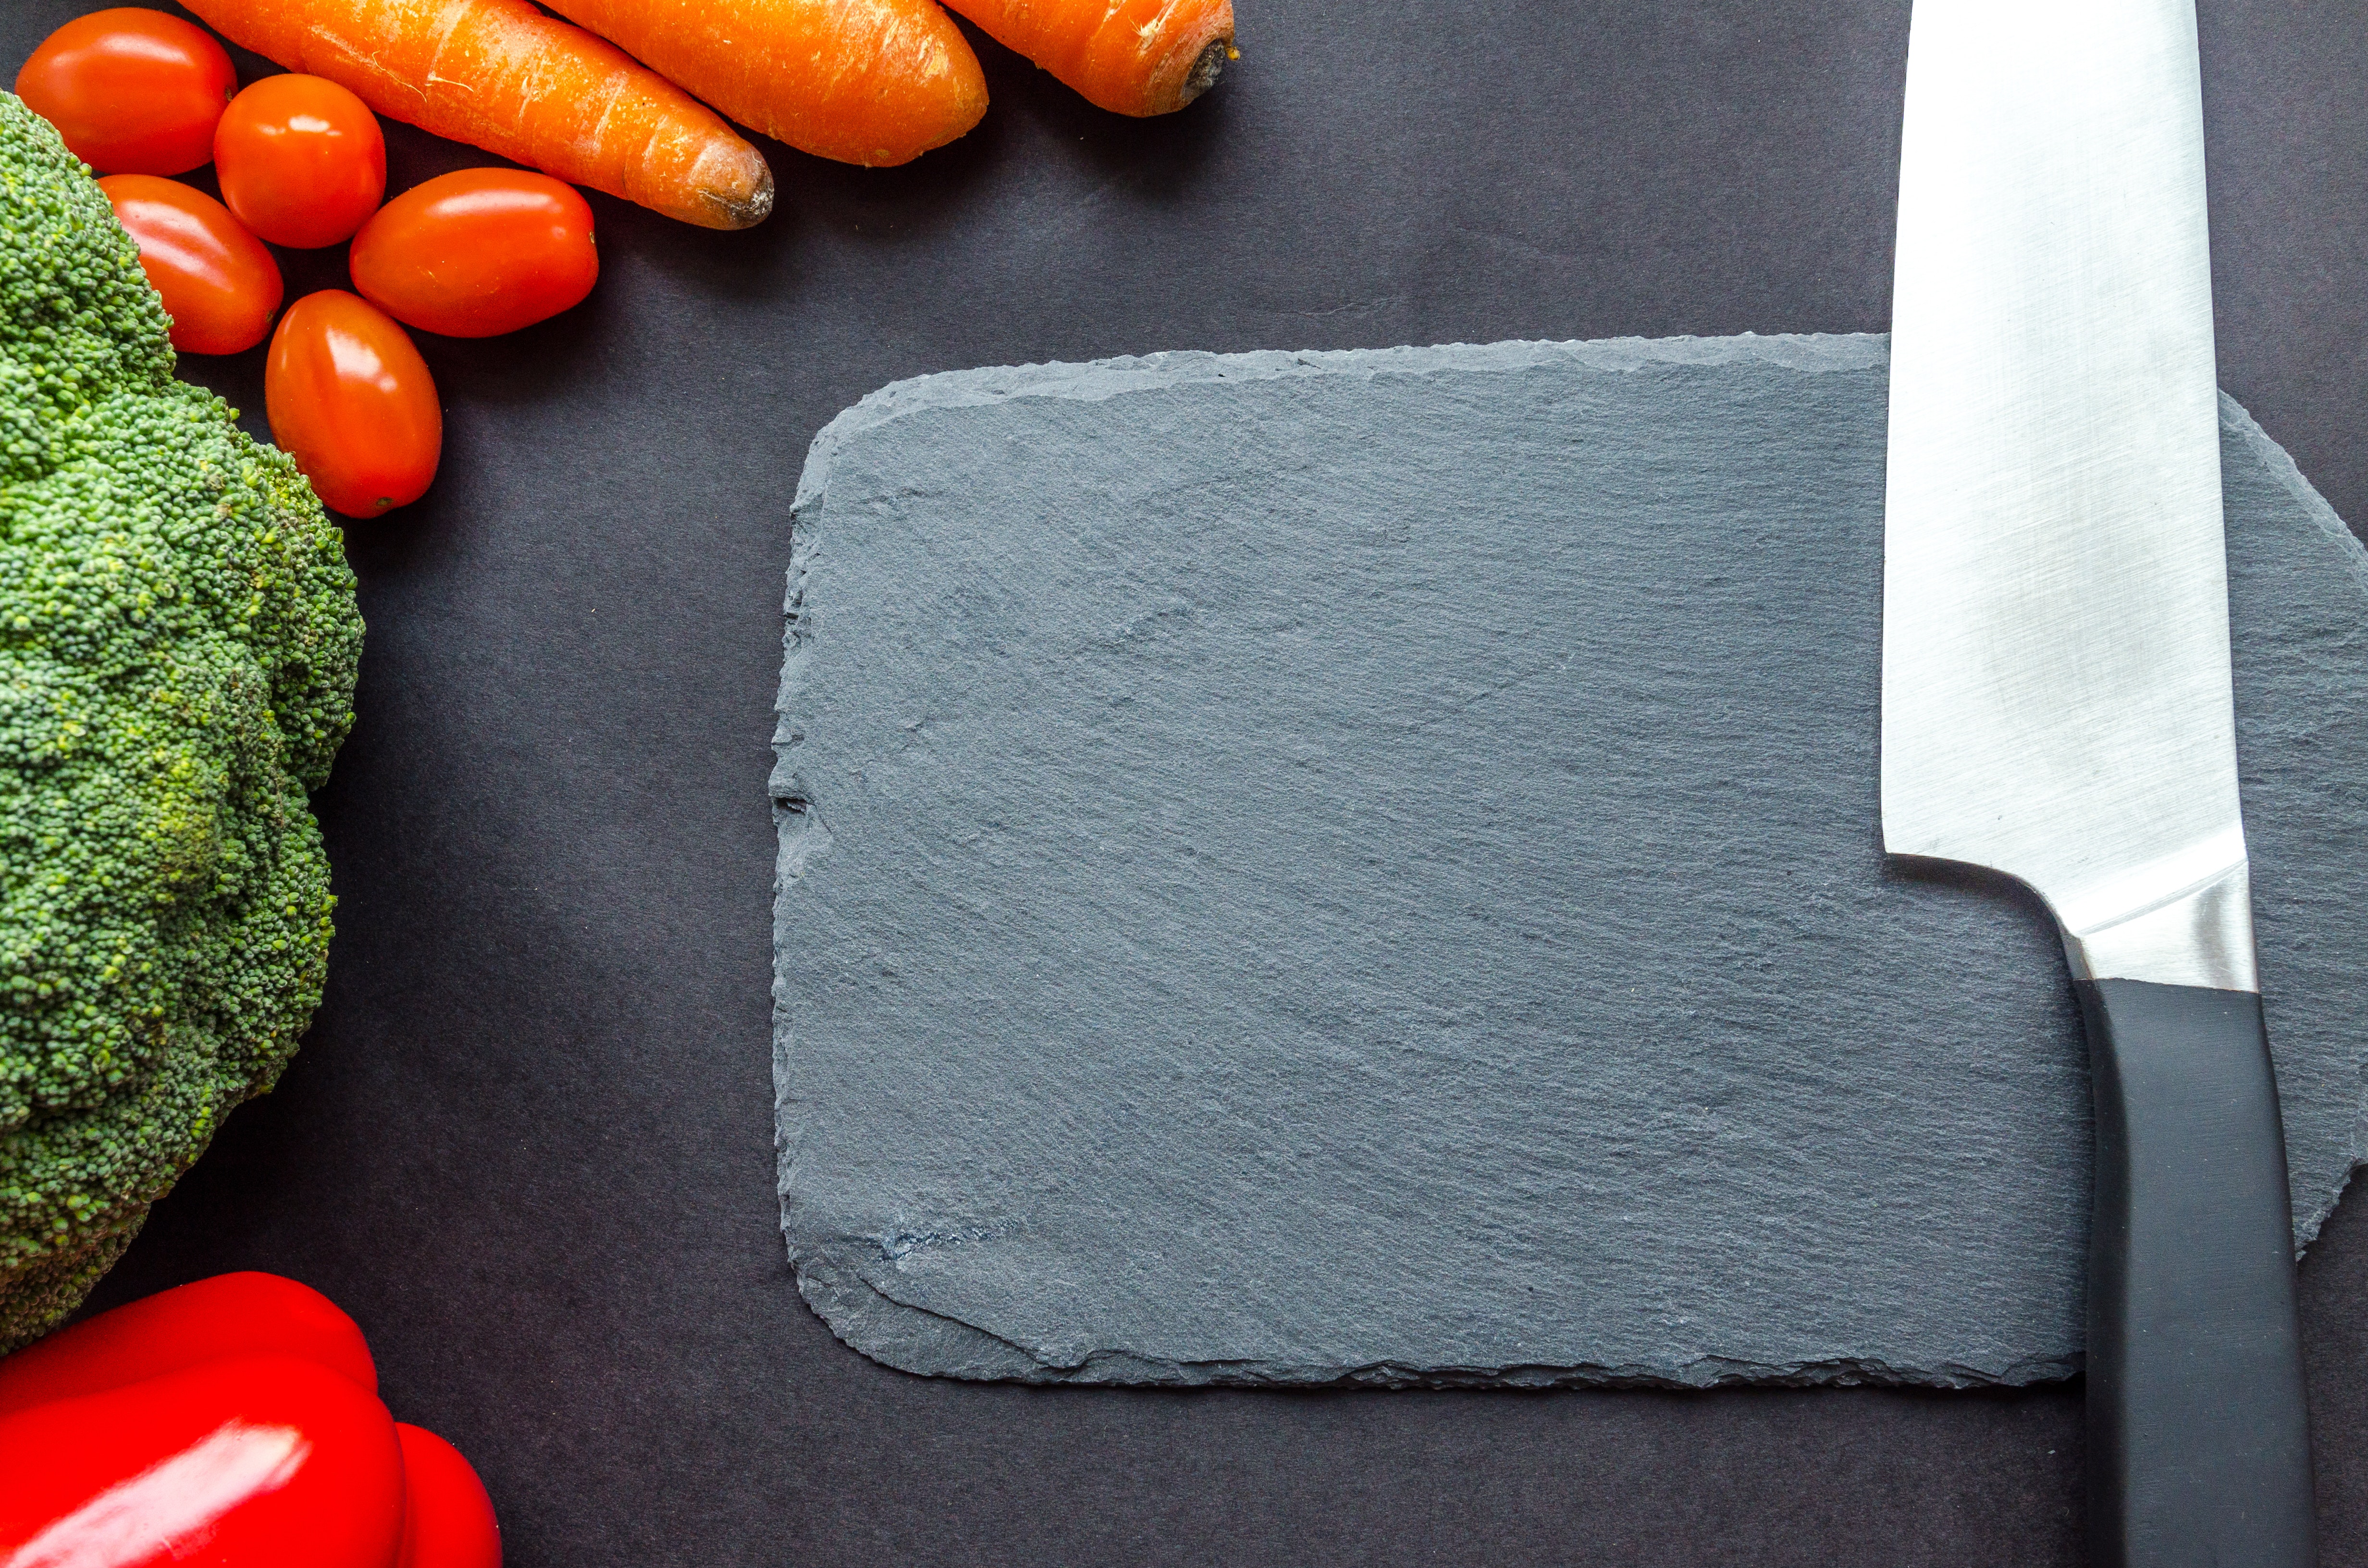 Black Handle Knife Near the Carrots, Board, Juicy, Tomatoes, Texture, HQ Photo